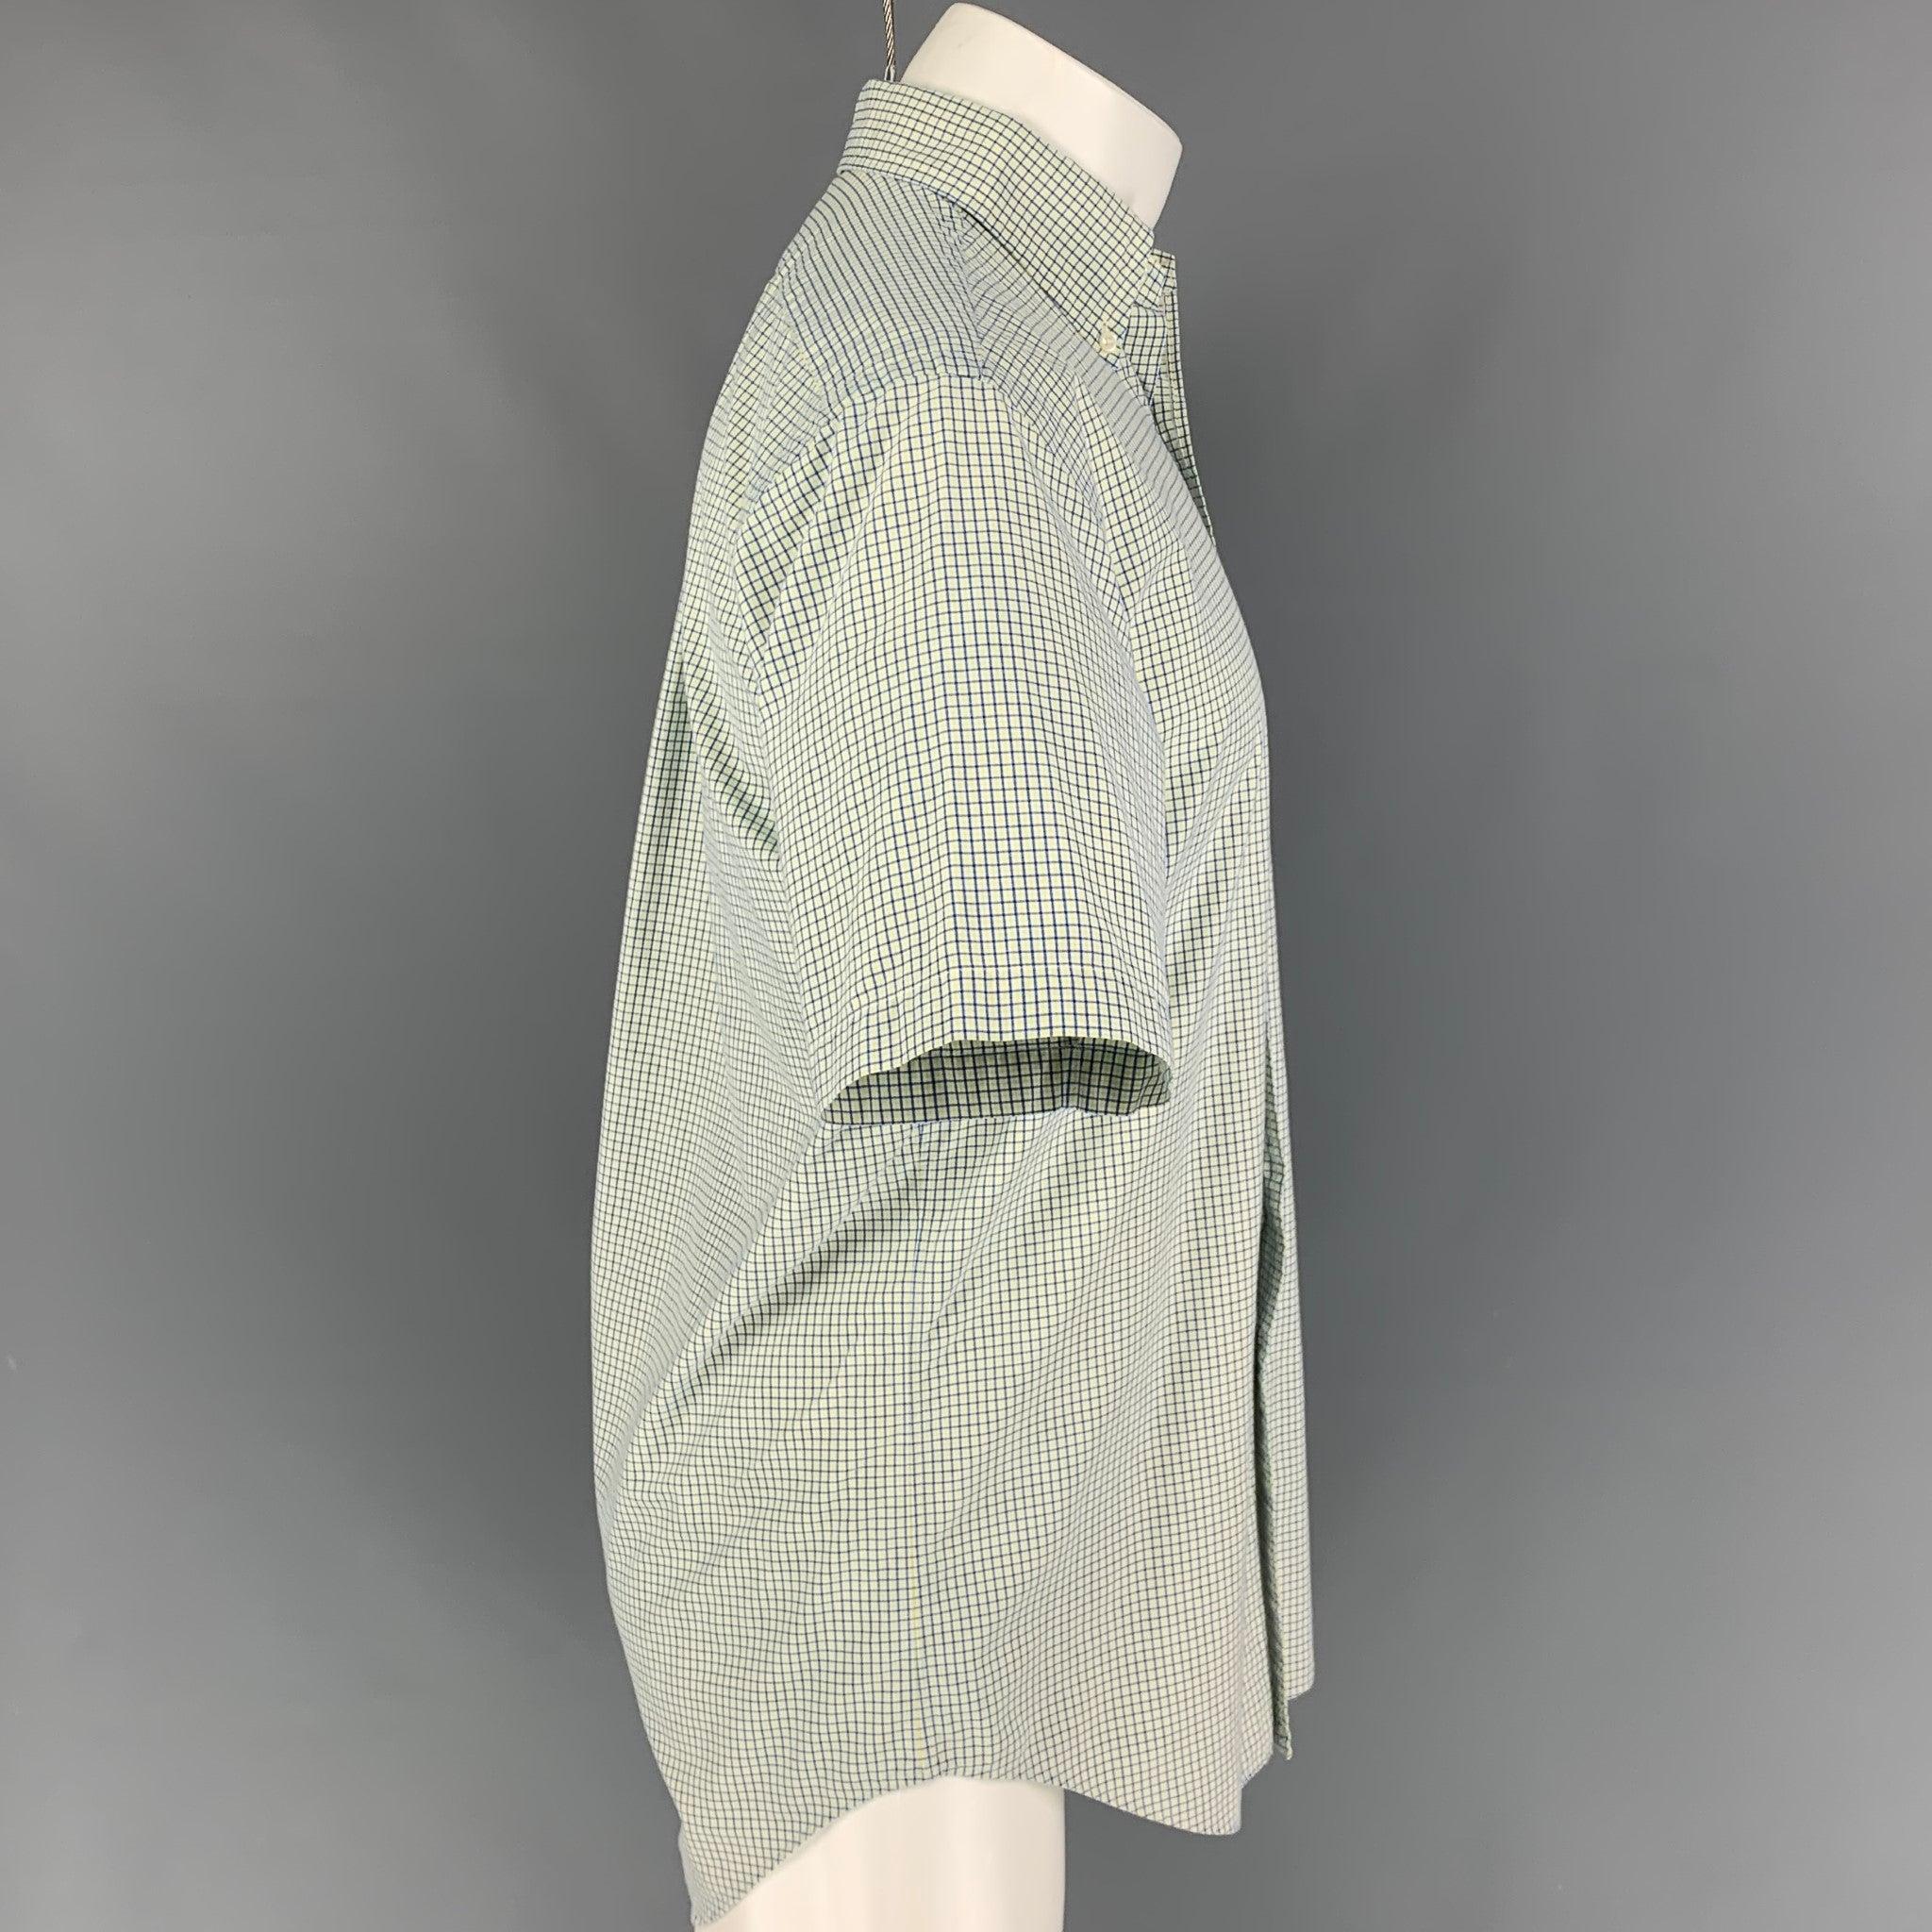 RALPH LAUREN short sleeve shirt comes in a green & blue checkered cotton featuring a classic fit, button down collar, front pocket, and a button up closure.
Very Good
Pre-Owned Condition. 

Marked:   S 

Measurements: 
 
Shoulder: 18.5 inches 